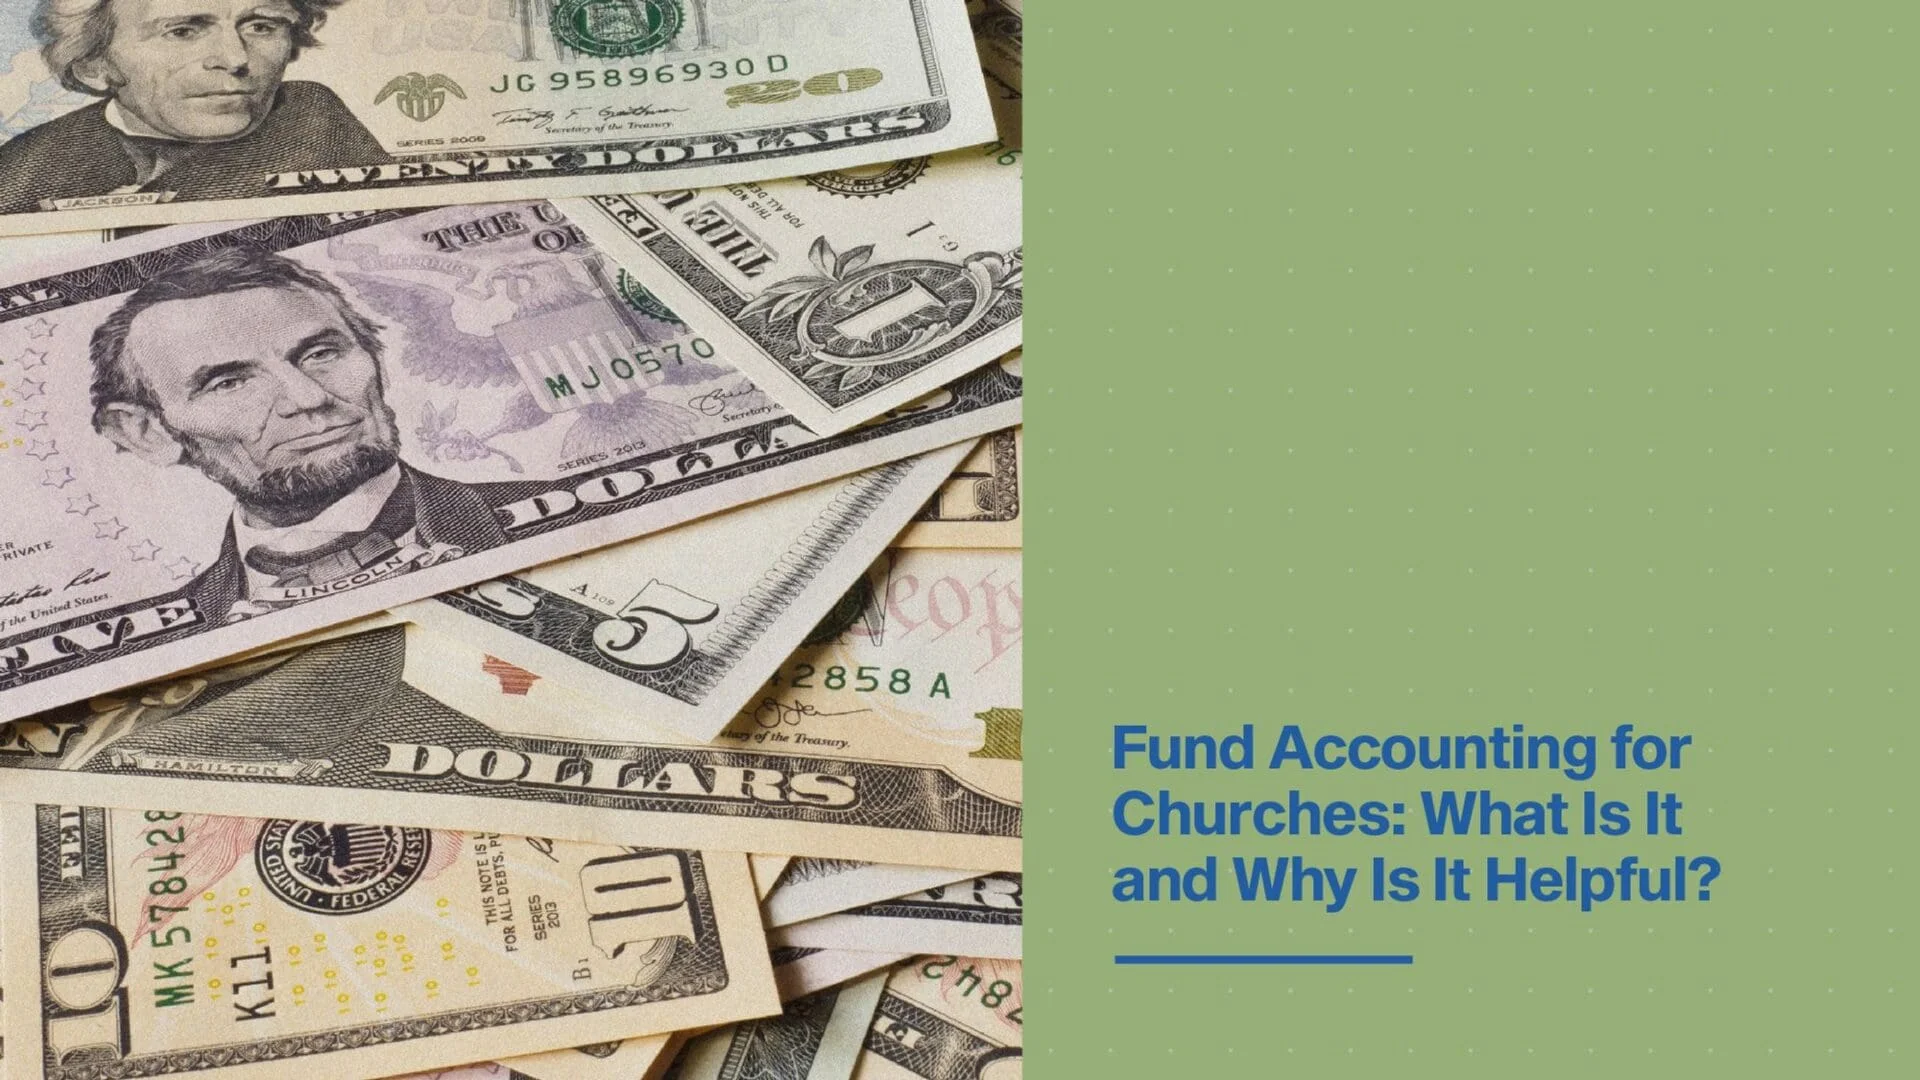 Fund accounting for churches